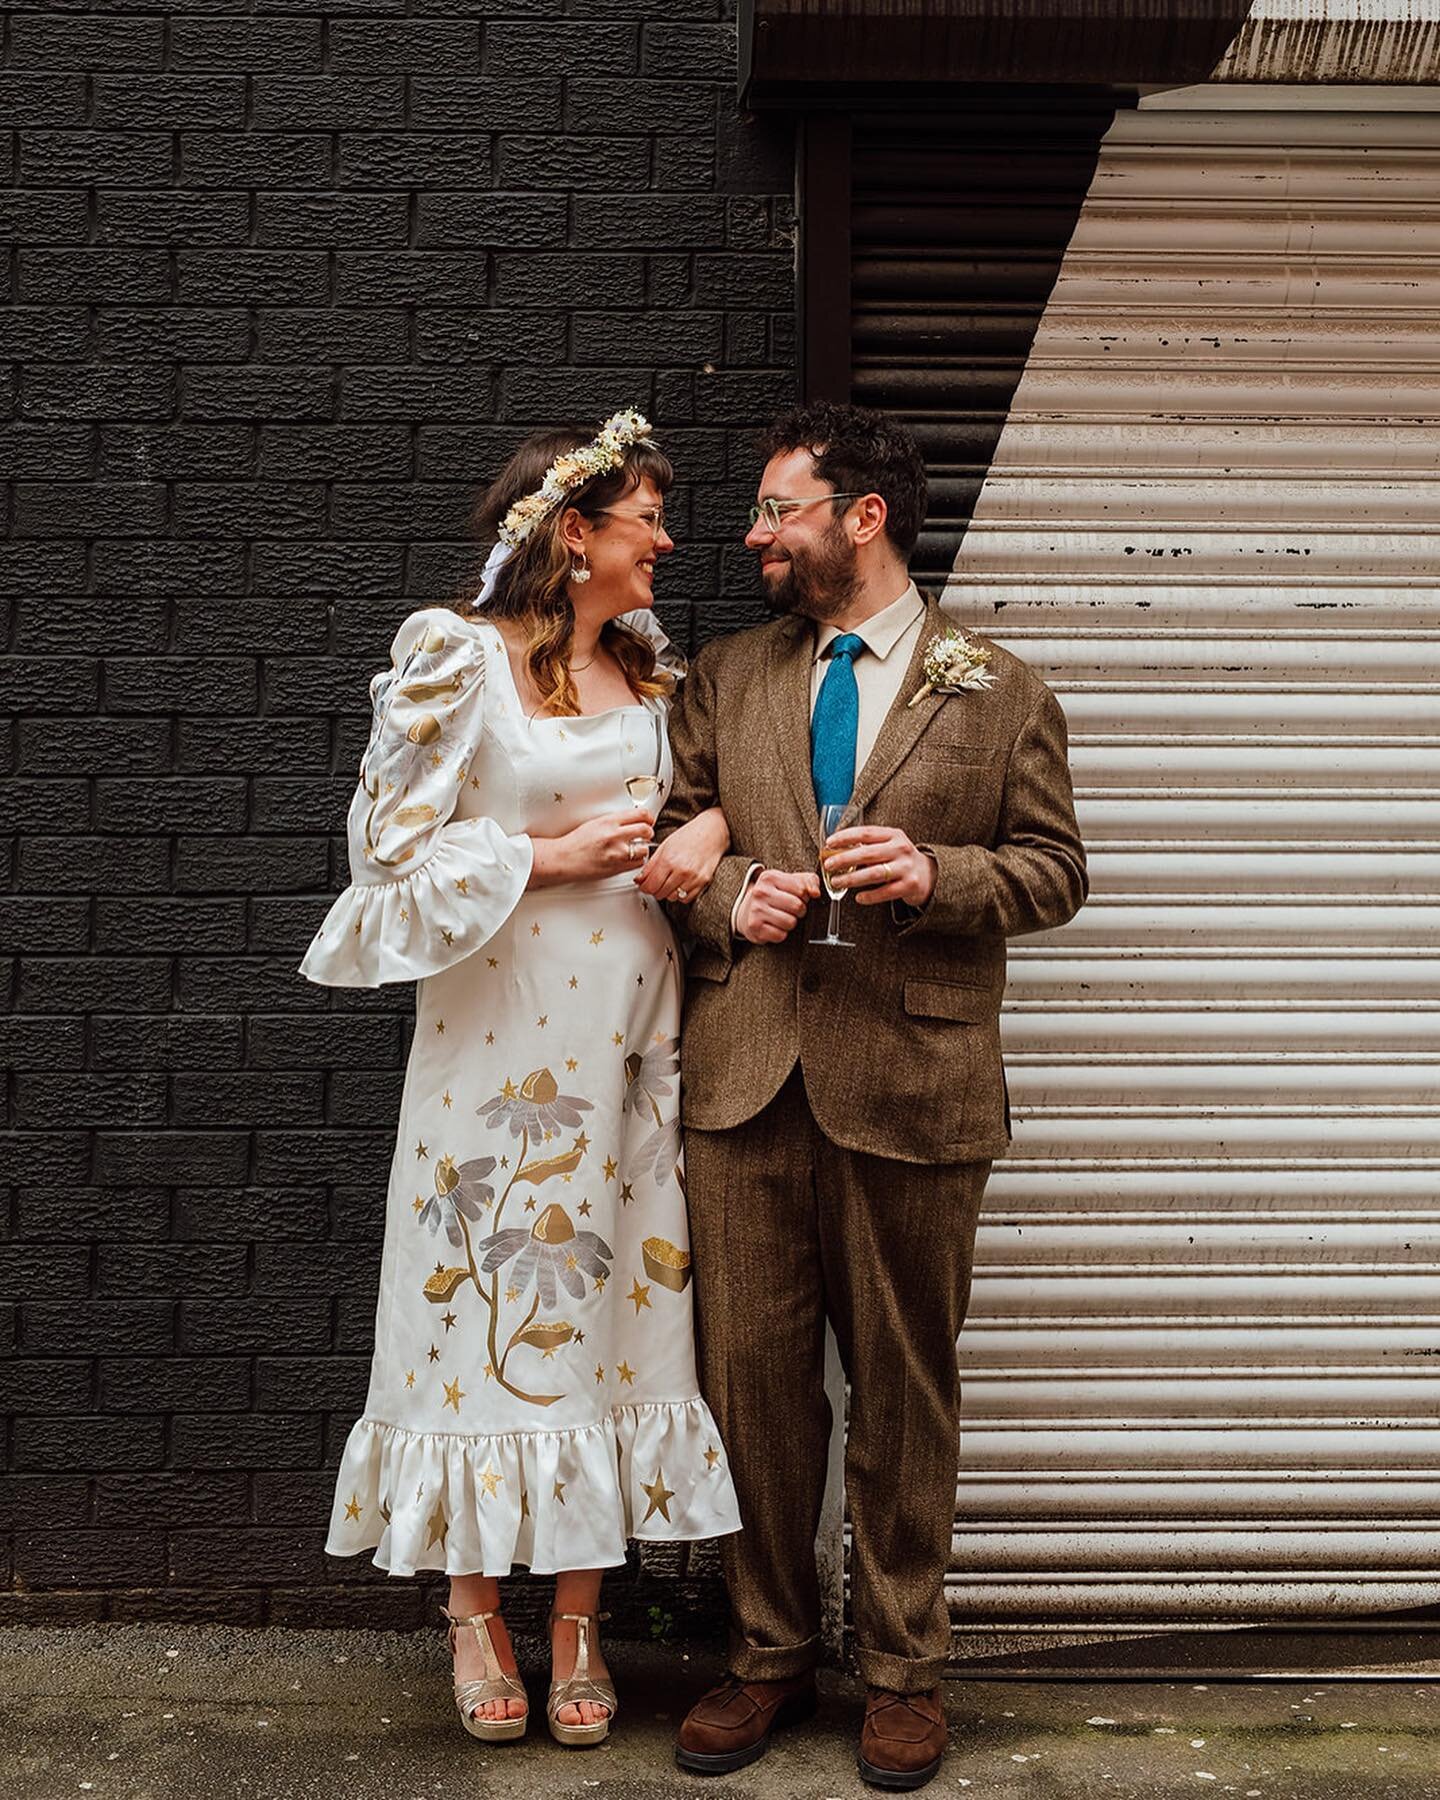 Daisy + Adam part 1 because why not 2 parts ey? Blooming marvellous day at @trafalgarwarehouse which was absolutely perfect for this cute little pair 😍✨🌞 
@marybensonwedding 
@weareblosm 
@wildwoodpaper 
.
.
.
.
.
.
.
.
.

#elliegraceweddings #shef